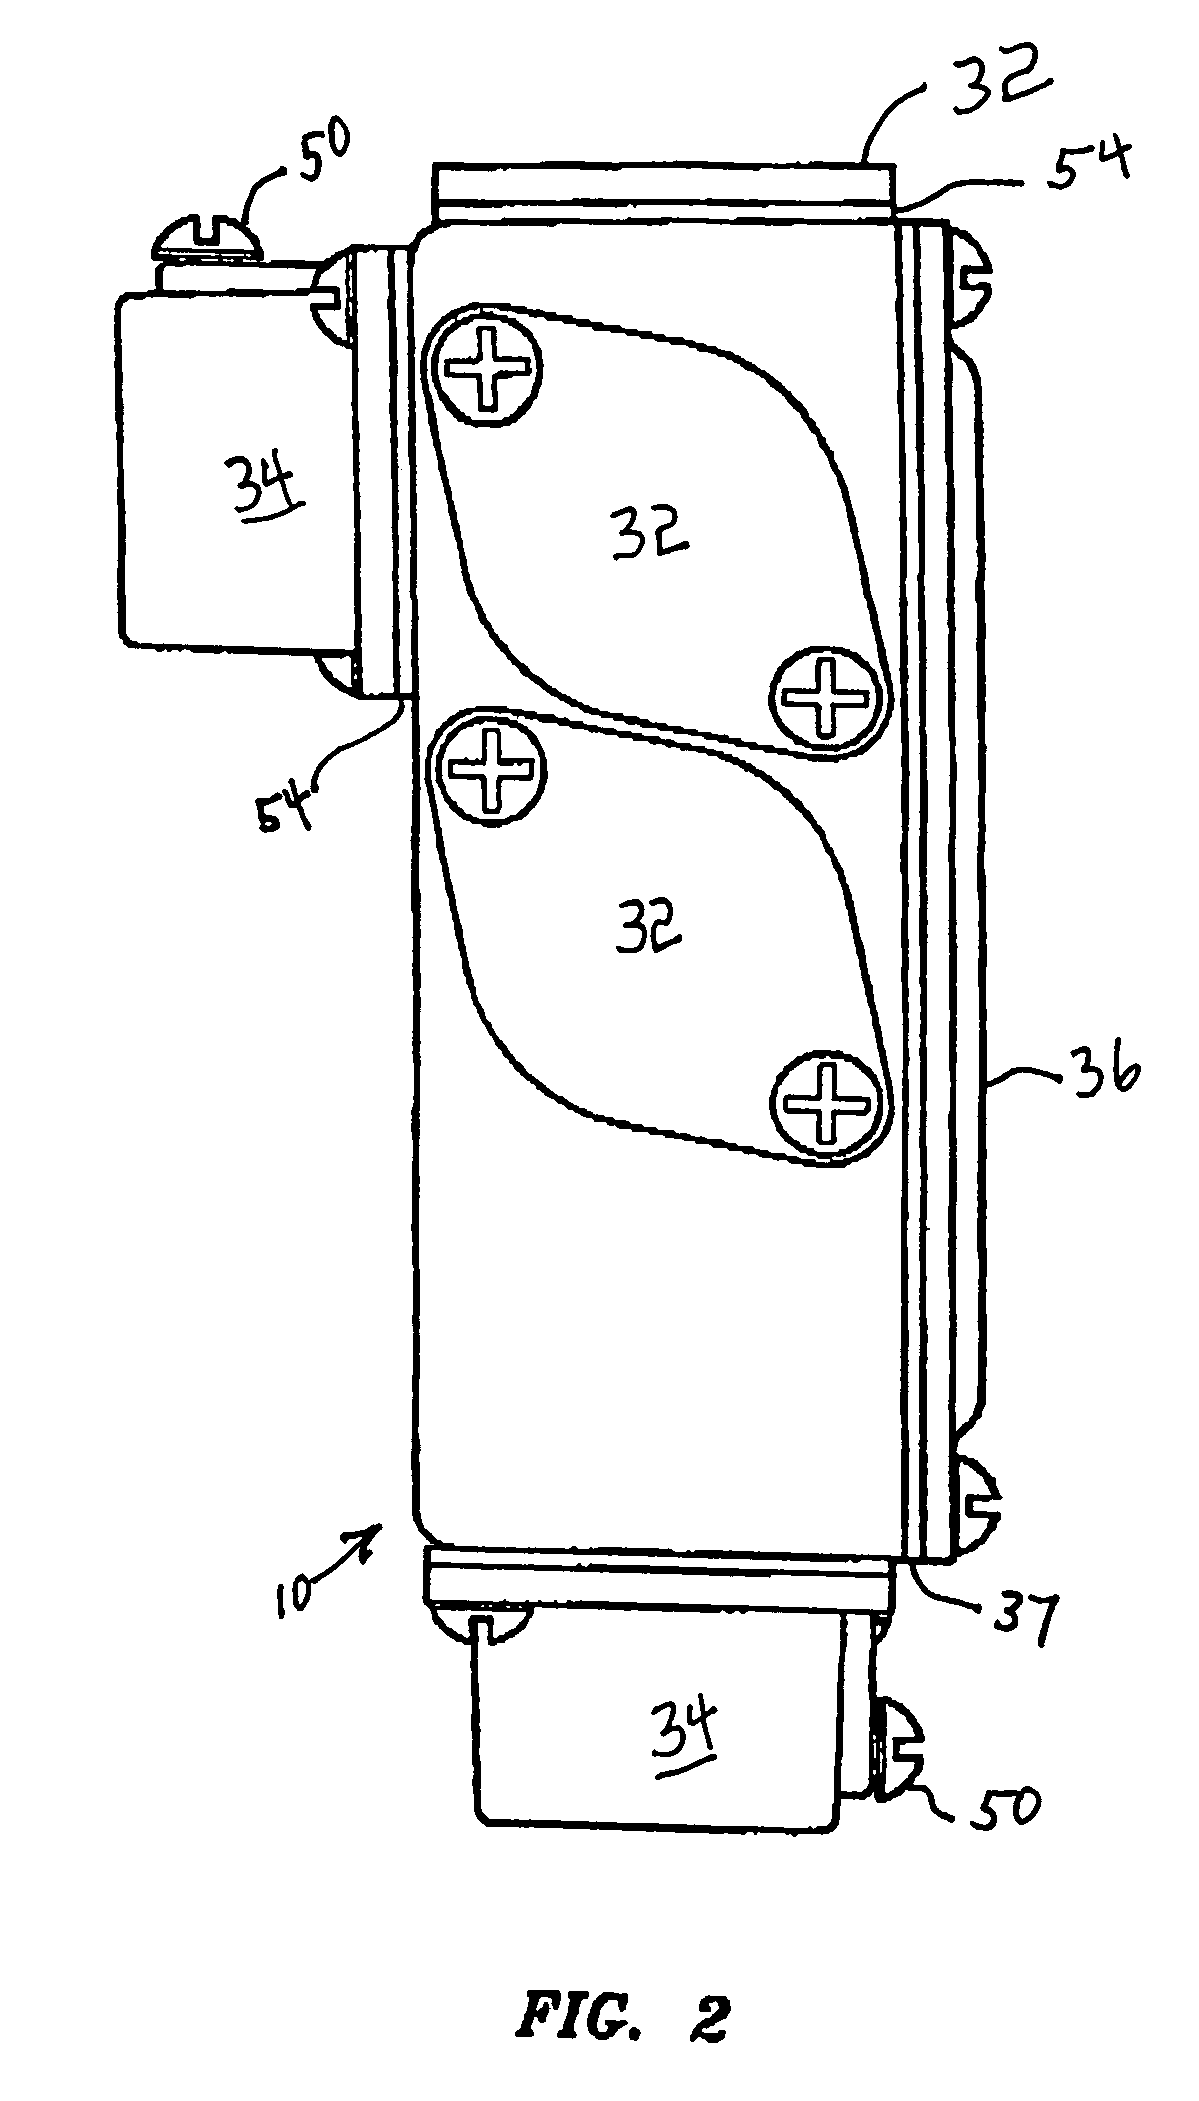 Electrical grounding and sealing of multi-position rain-tight junction box